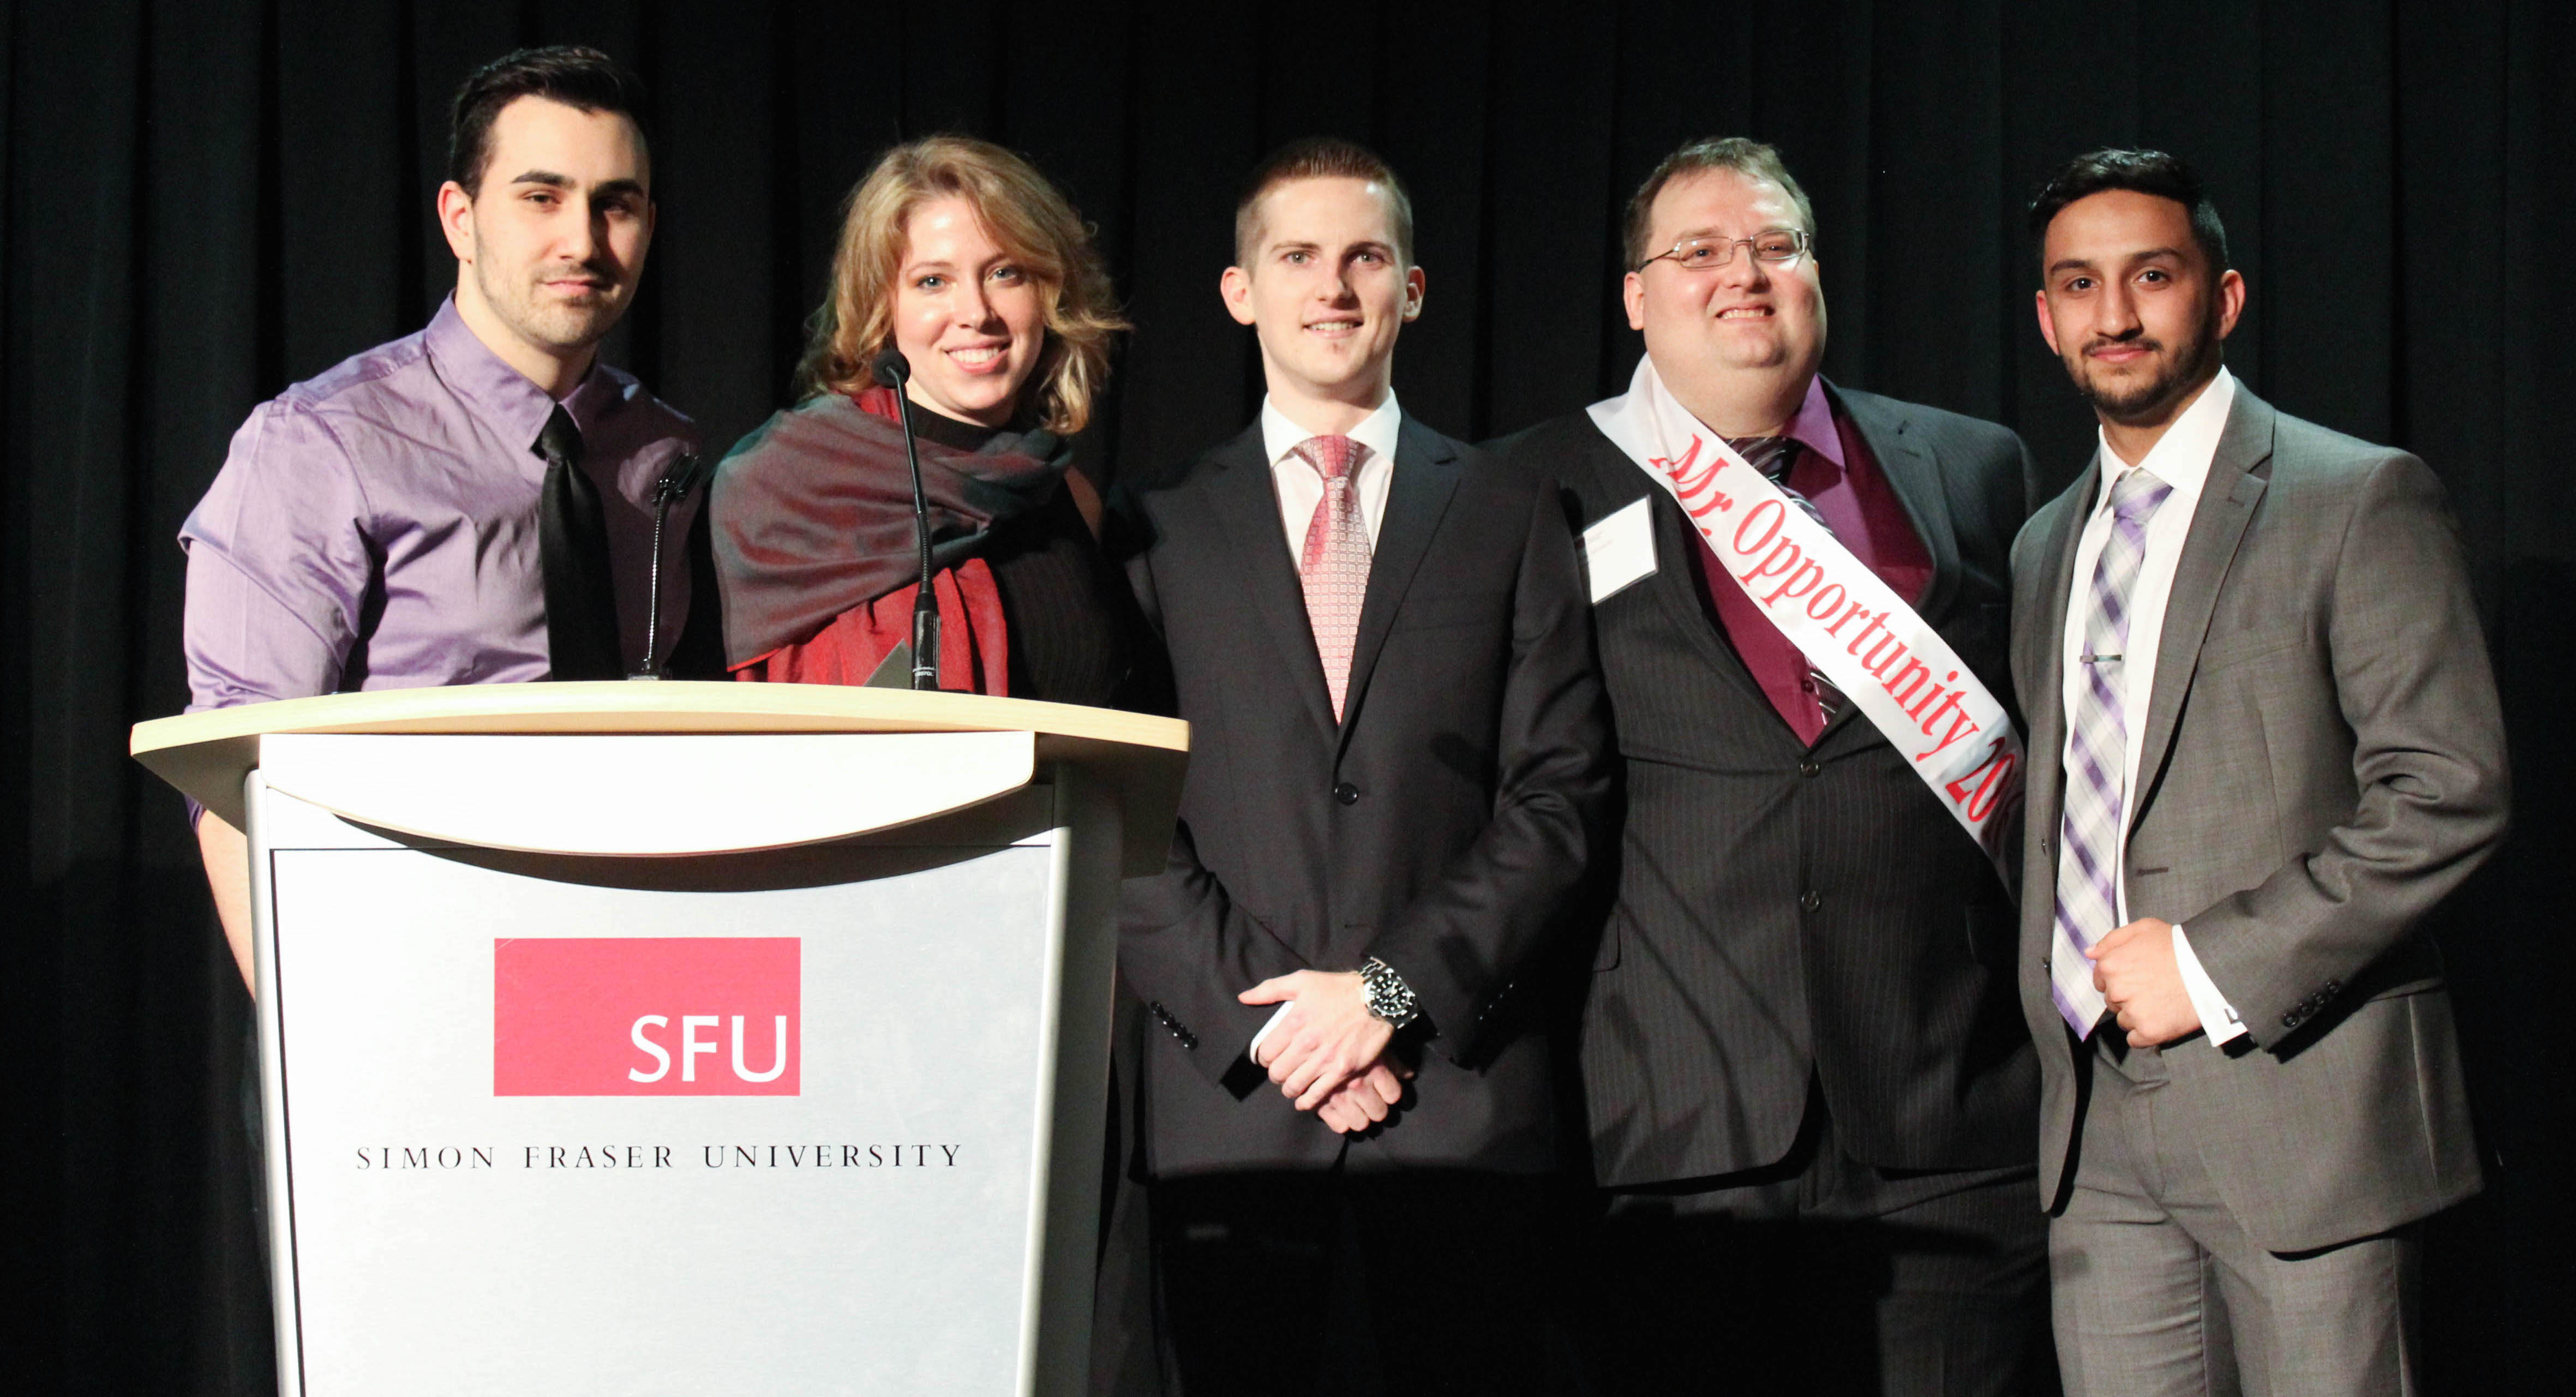 Cannabis infused chocolate venture Stolz won “most investable opportunity” at Opportunity Fest 2016. From left to right: Michael Pizzolon, Director of Entrepreneurship for SFU Sarah Lubik, Garrett Downes, Jeff Salzsauler, and Smarth Duggal. 